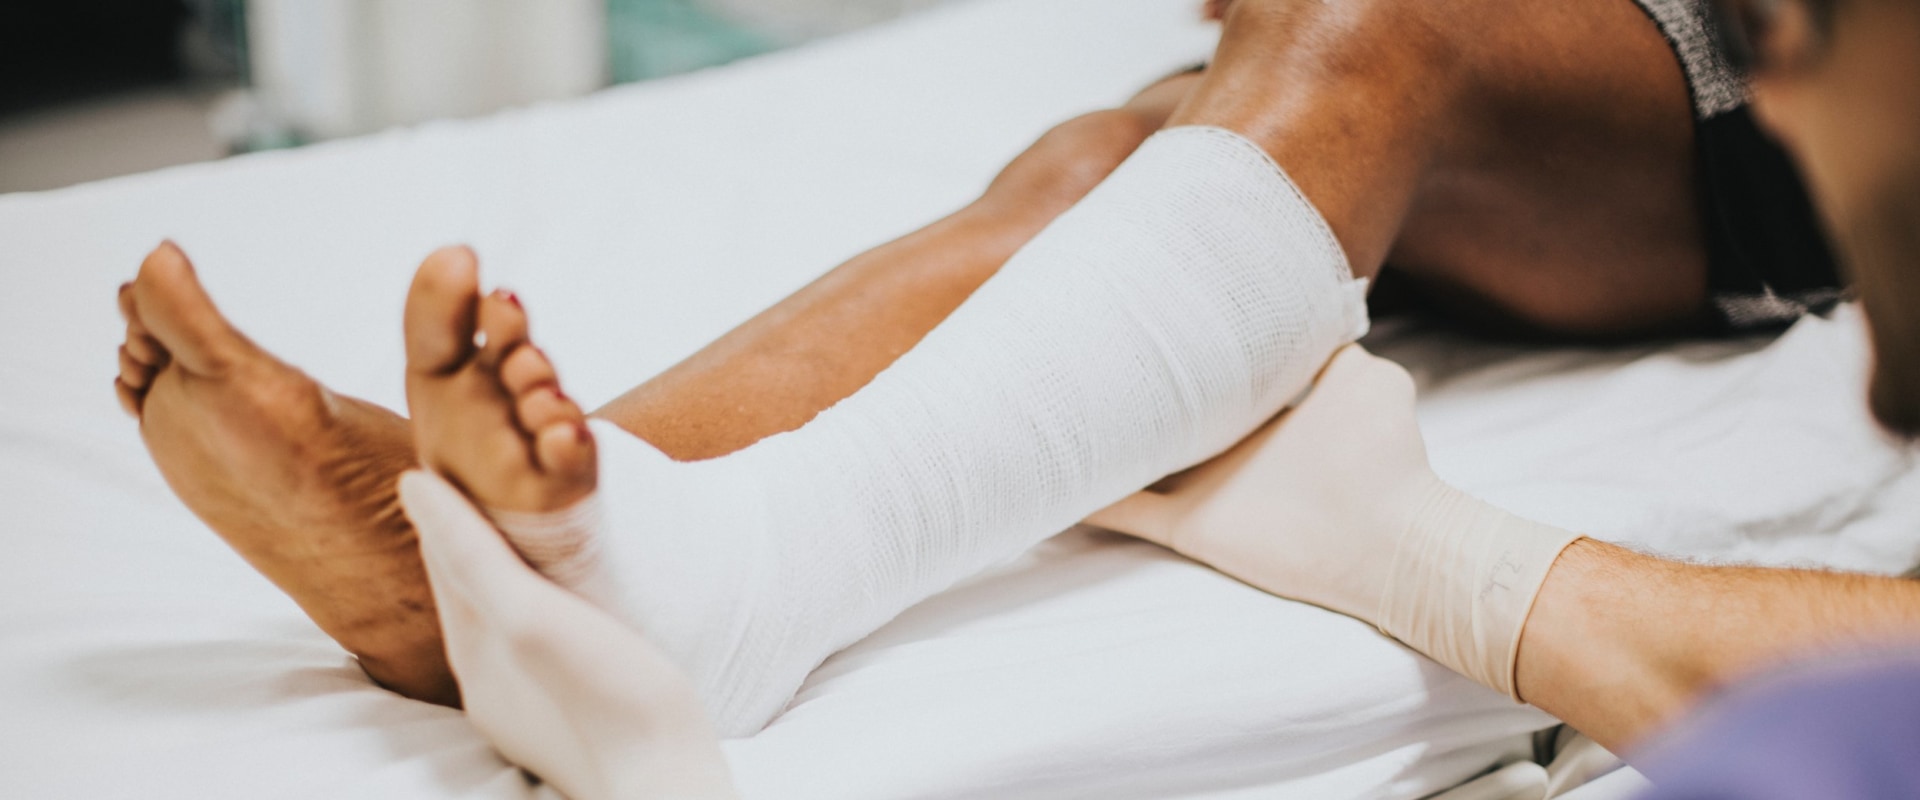 What are the different types of injuries?